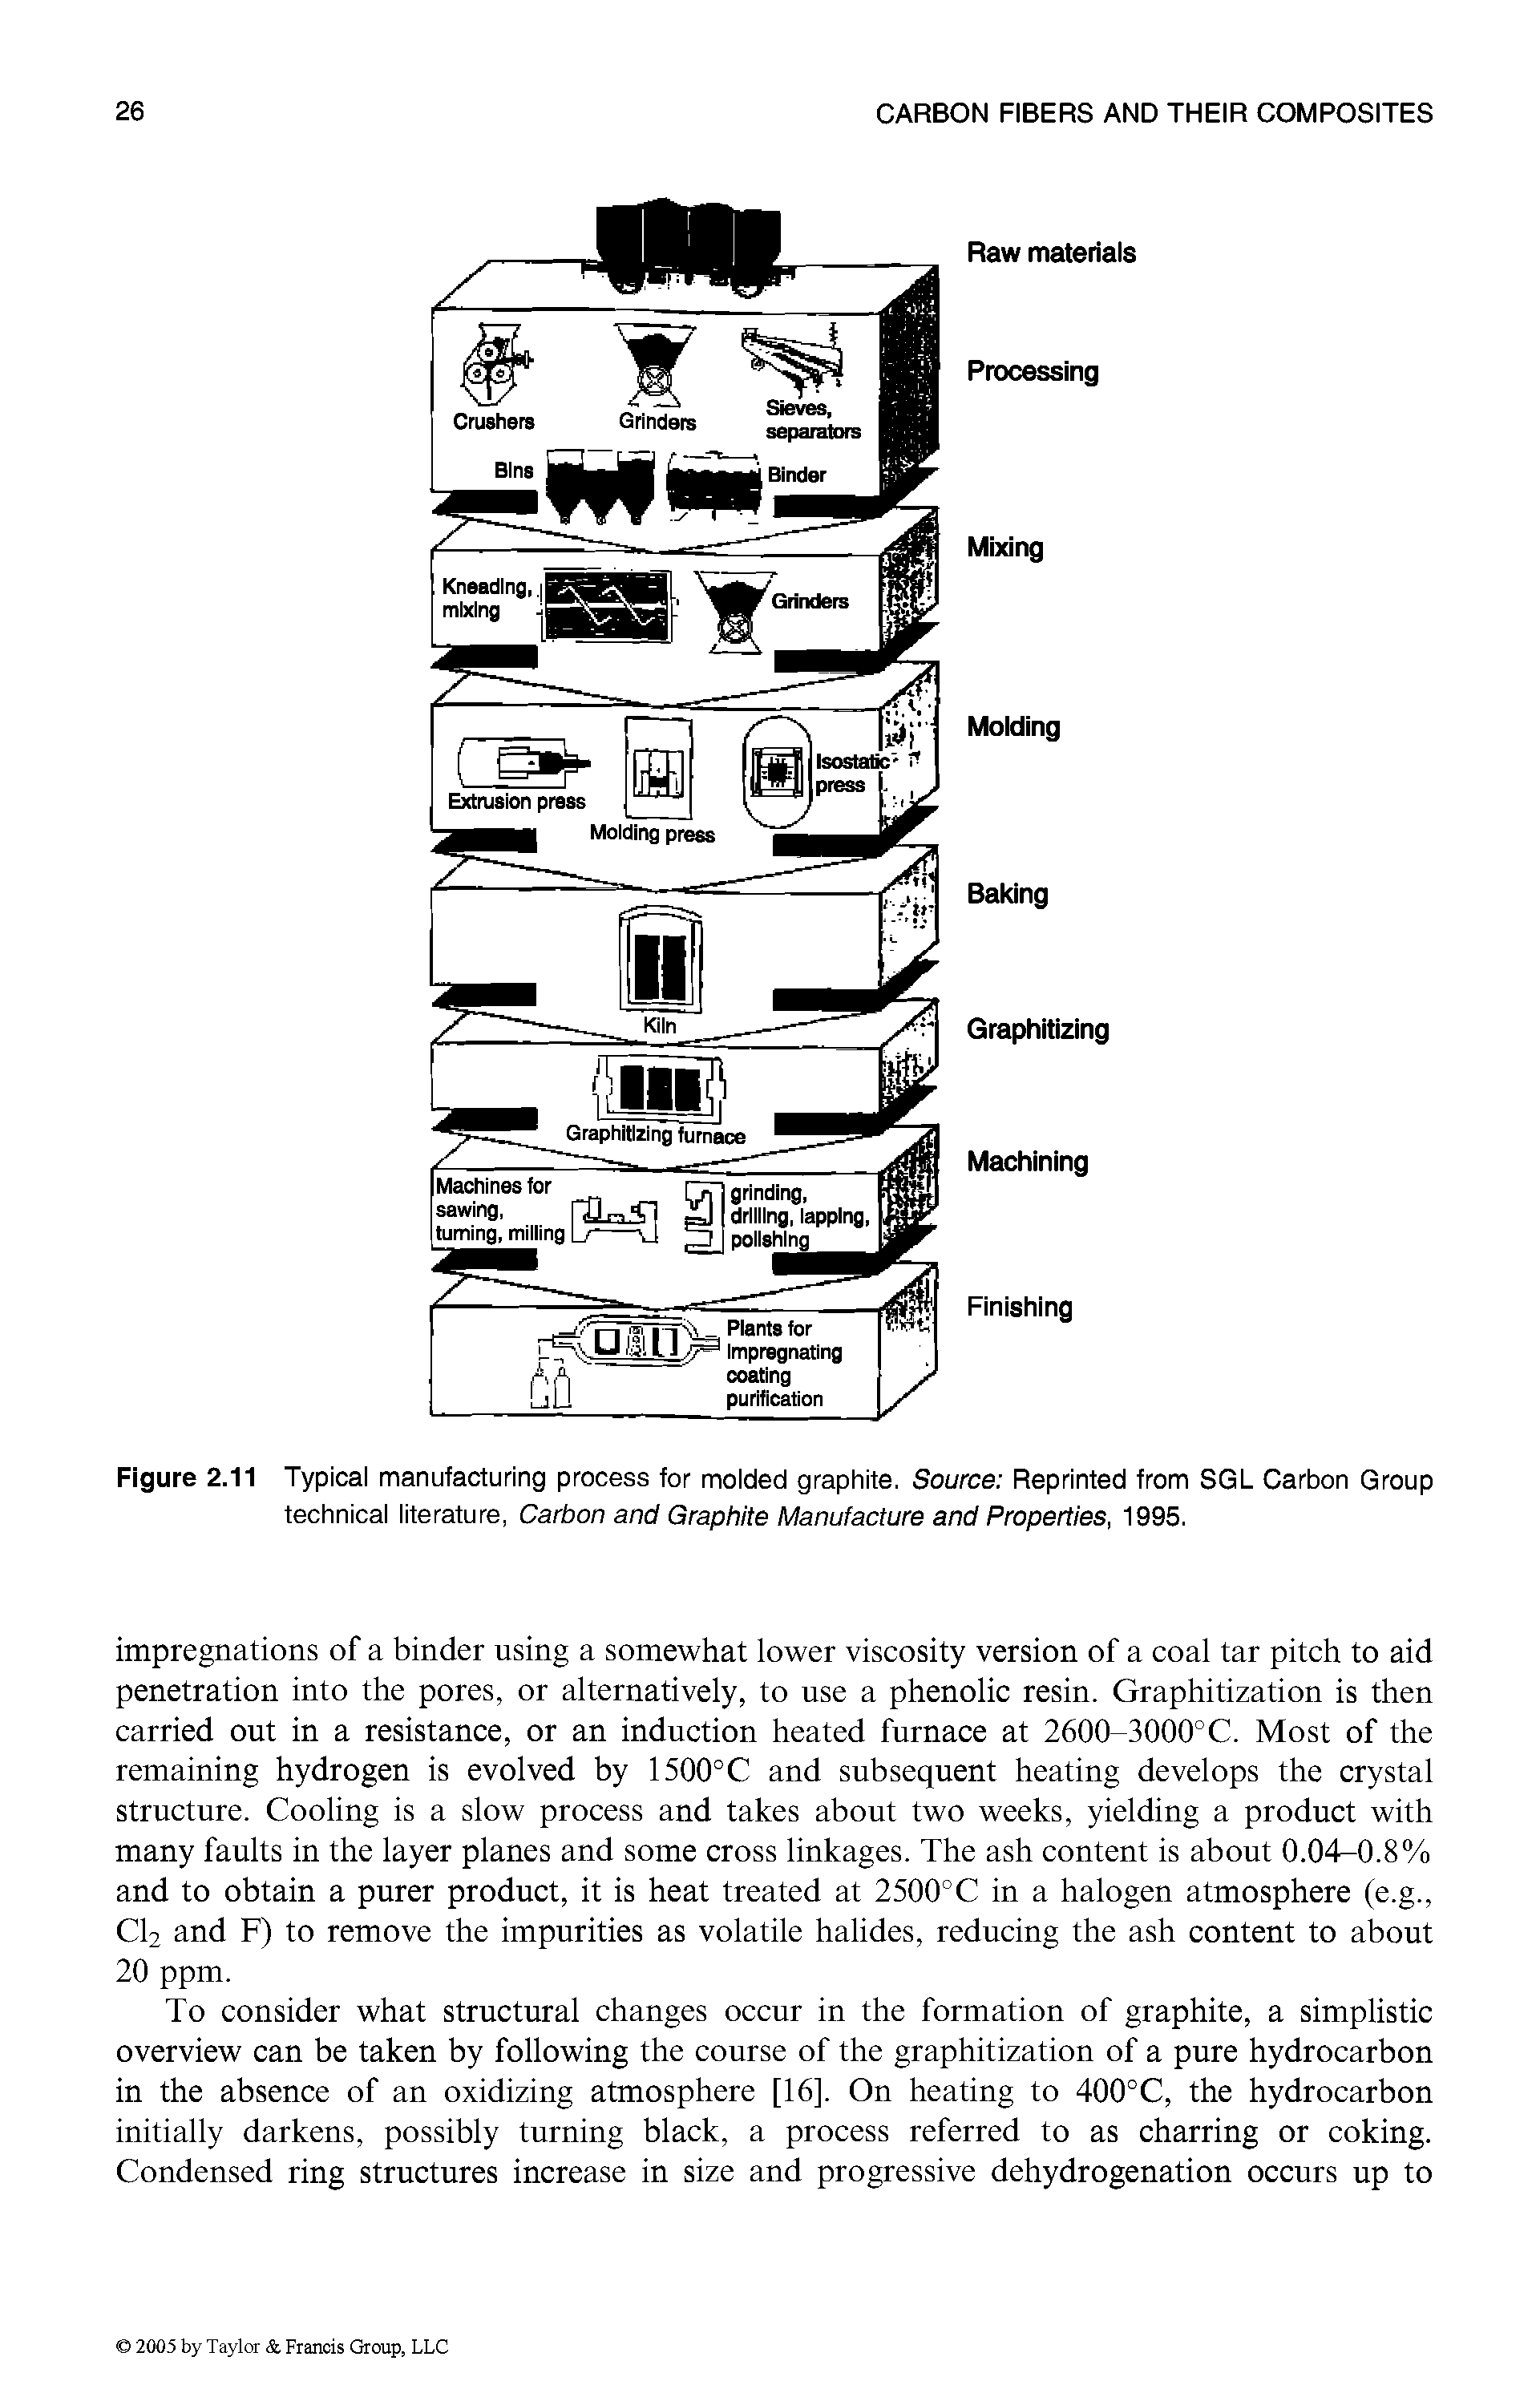 Figure 2.11 Typical manufacturing process for molded graphite. Source Reprinted from SGL Carbon Group technical literature, Carbon and Graphite Manufacture and Properties, 1995.